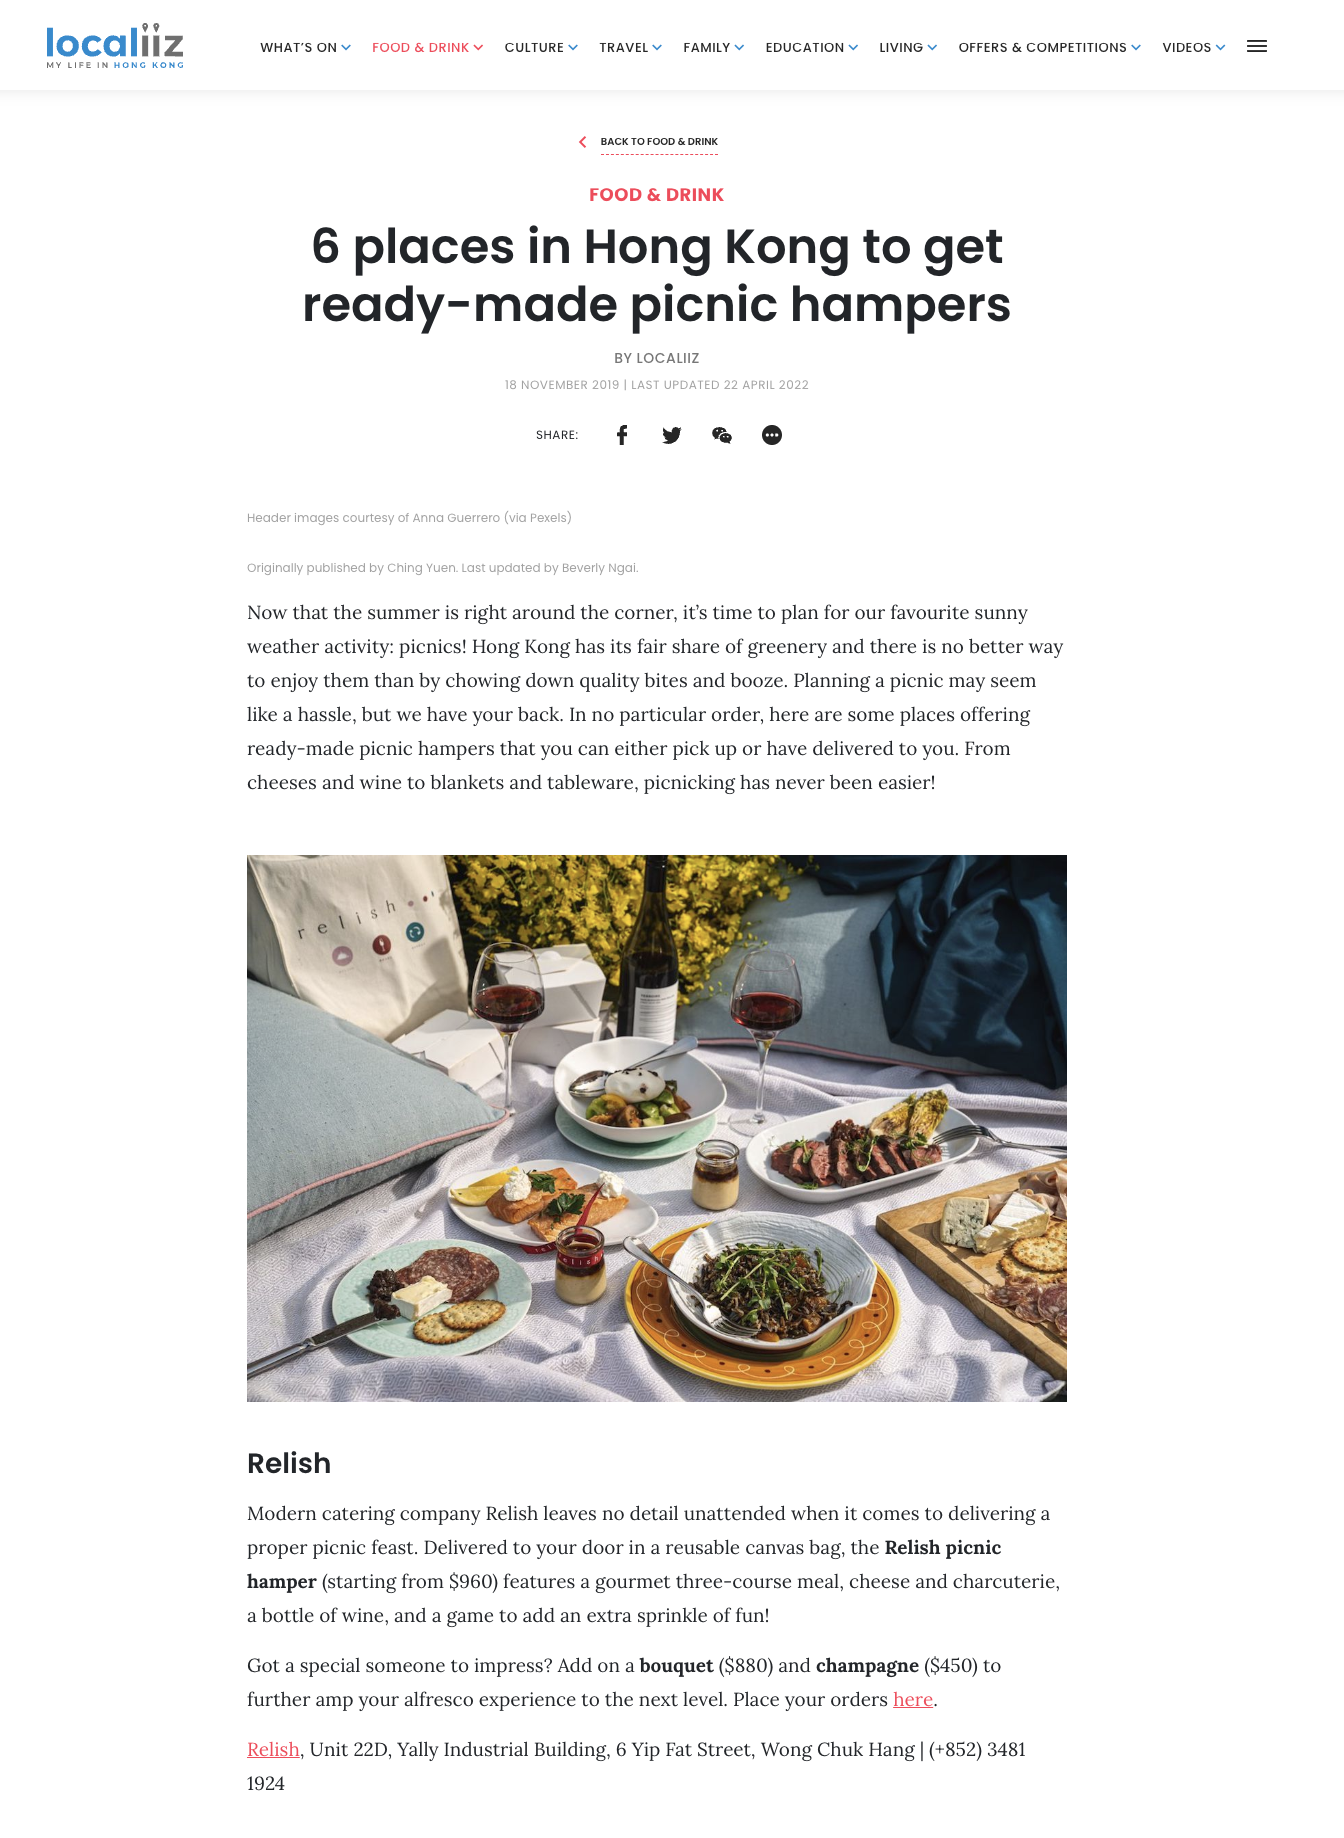 22 04 2022 RELISH 6 Places in HK to Get Ready-Made Picnic Hampers (Localiiz).png